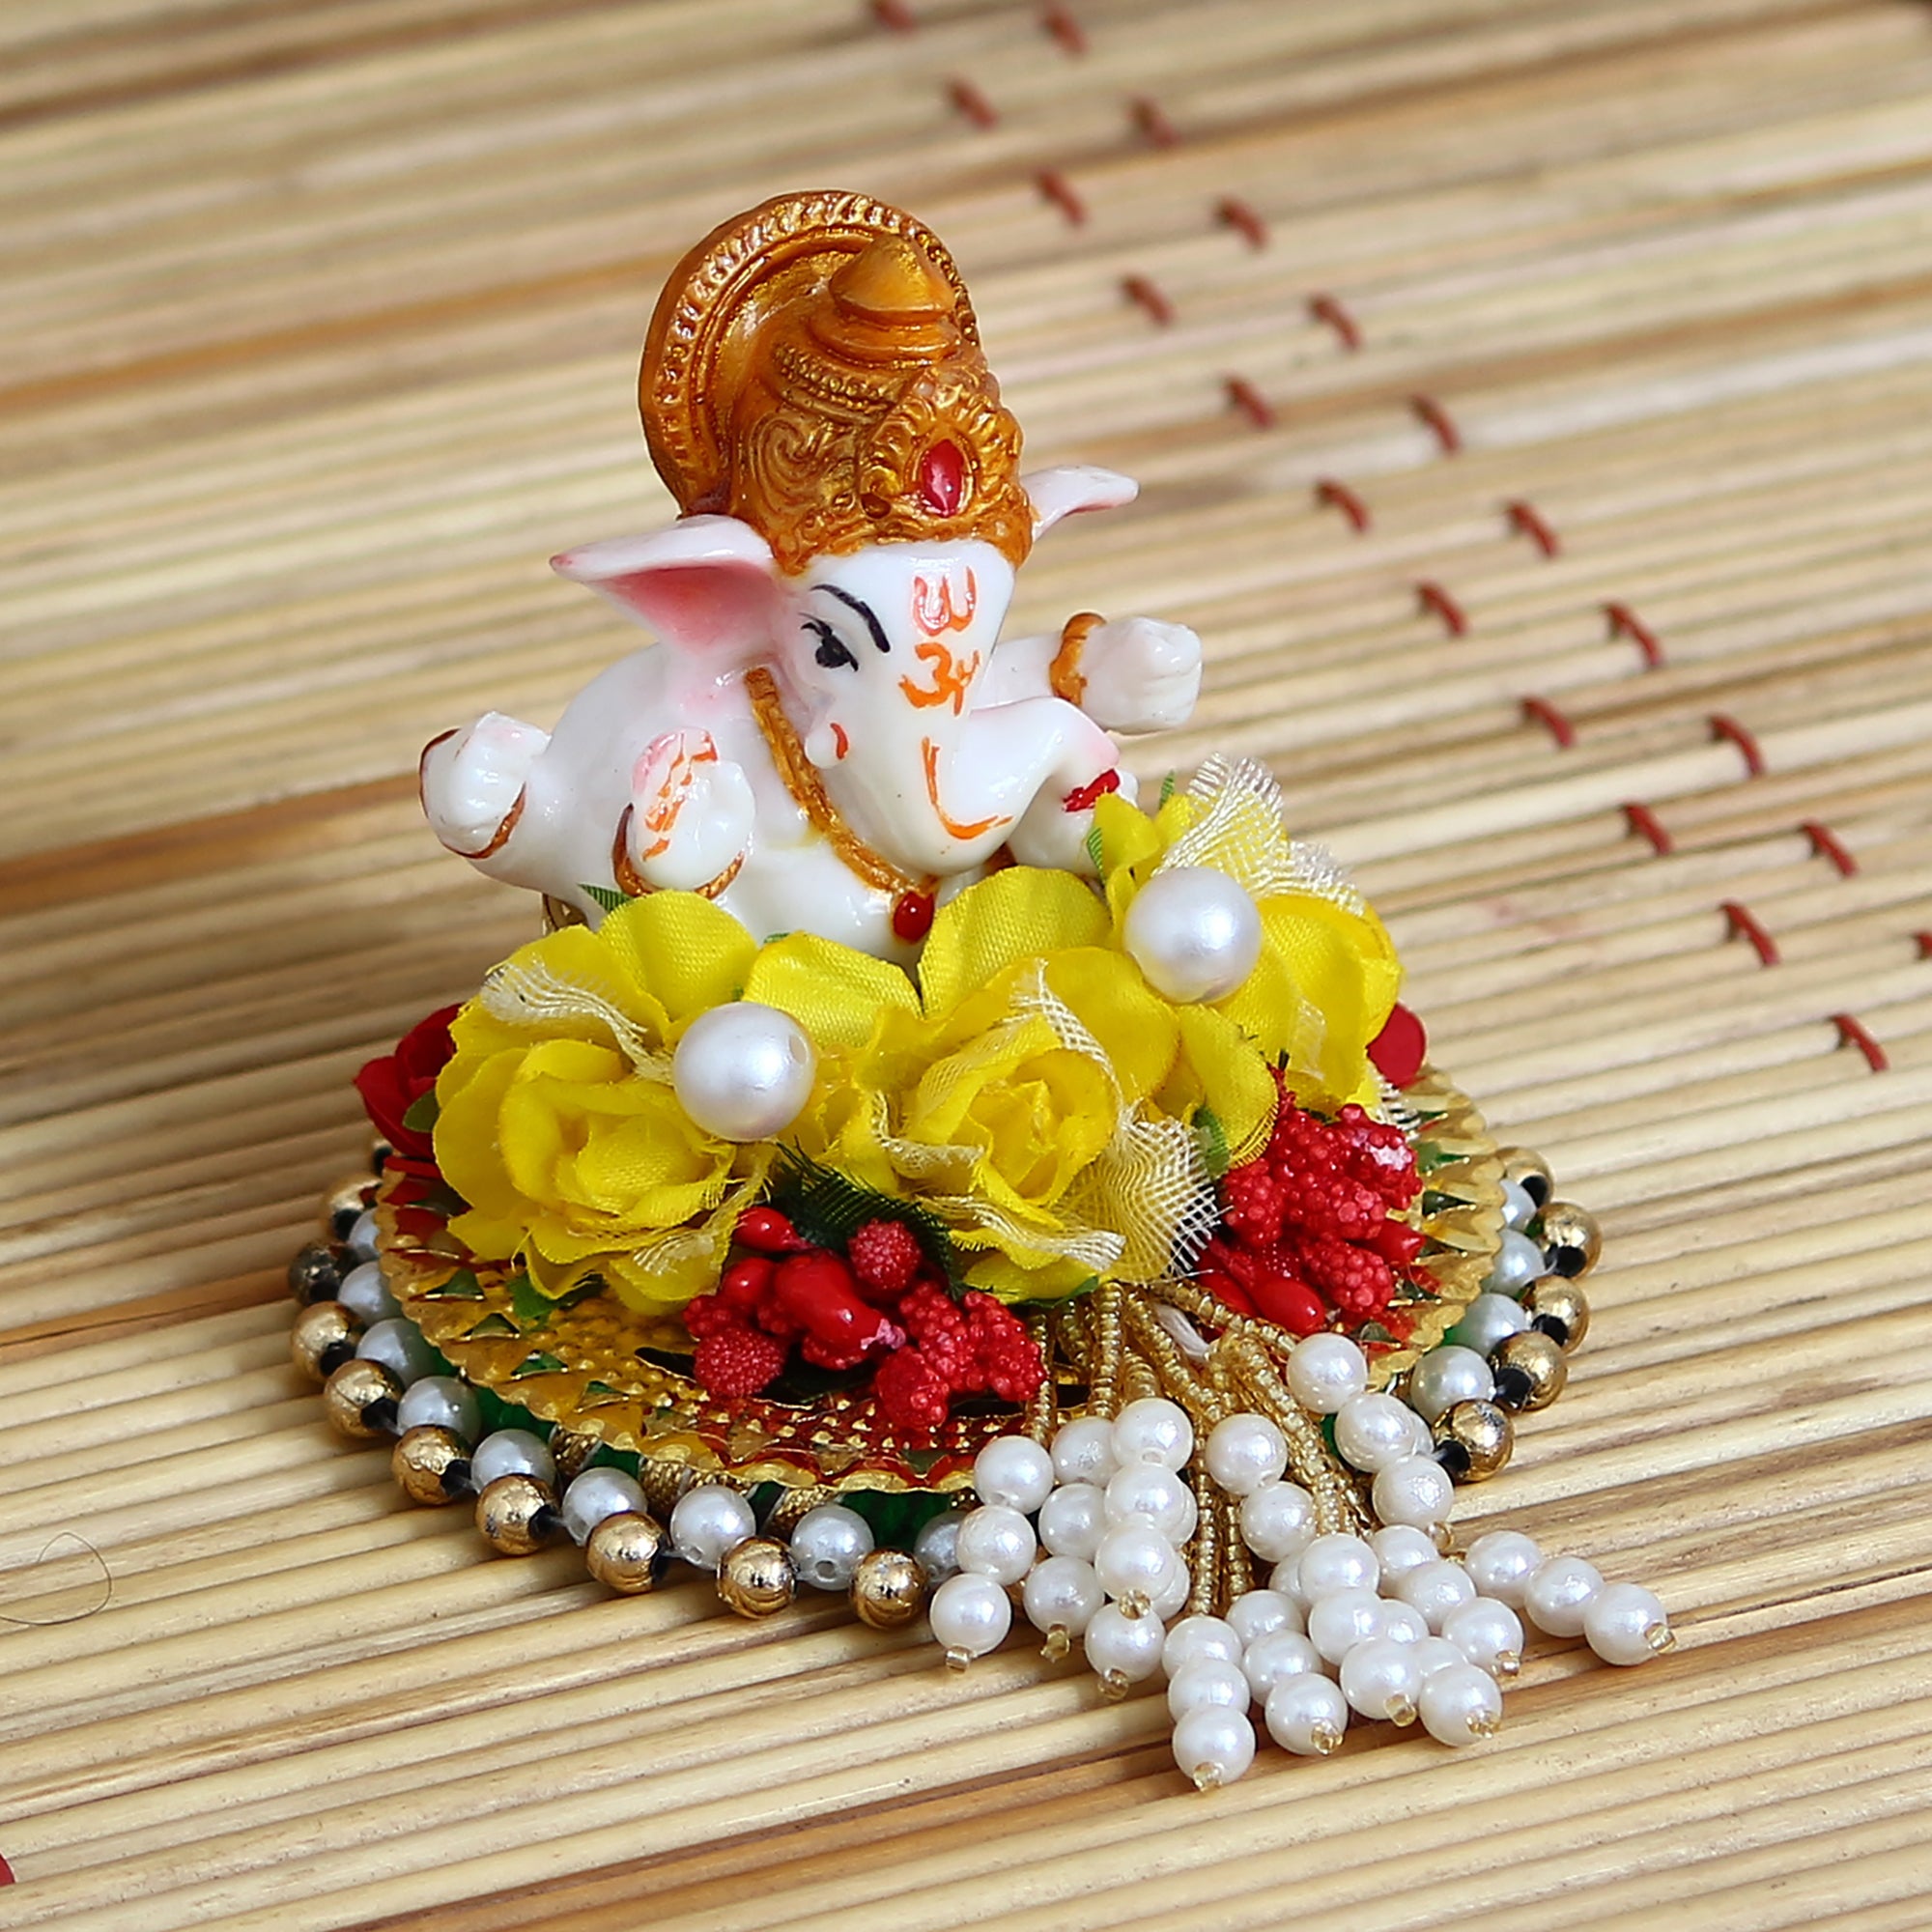 Lord Ganesha Idol on Decorative Handcrafted Plate with Colorful Flowers 1